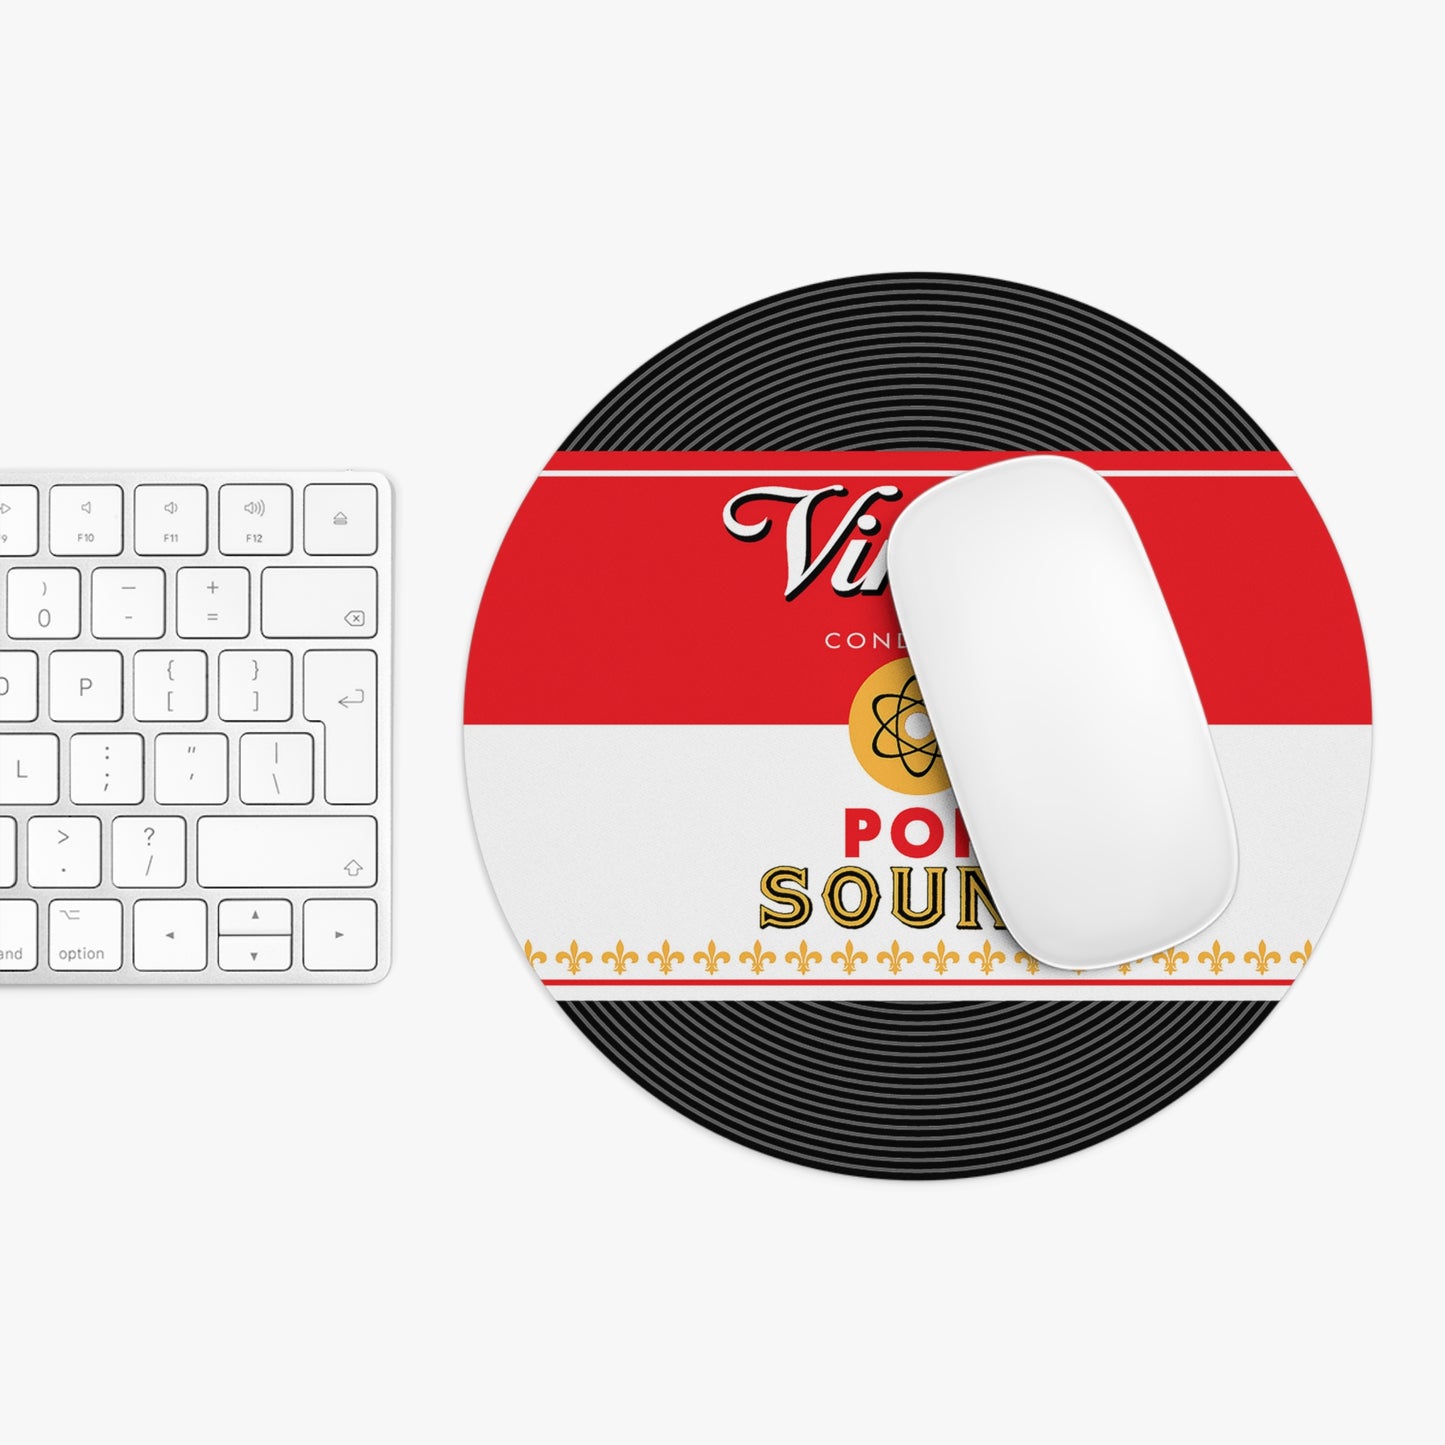 Vinyl Record Themed Mouse Pad Vinyl Condensed Print with mouse and laptop